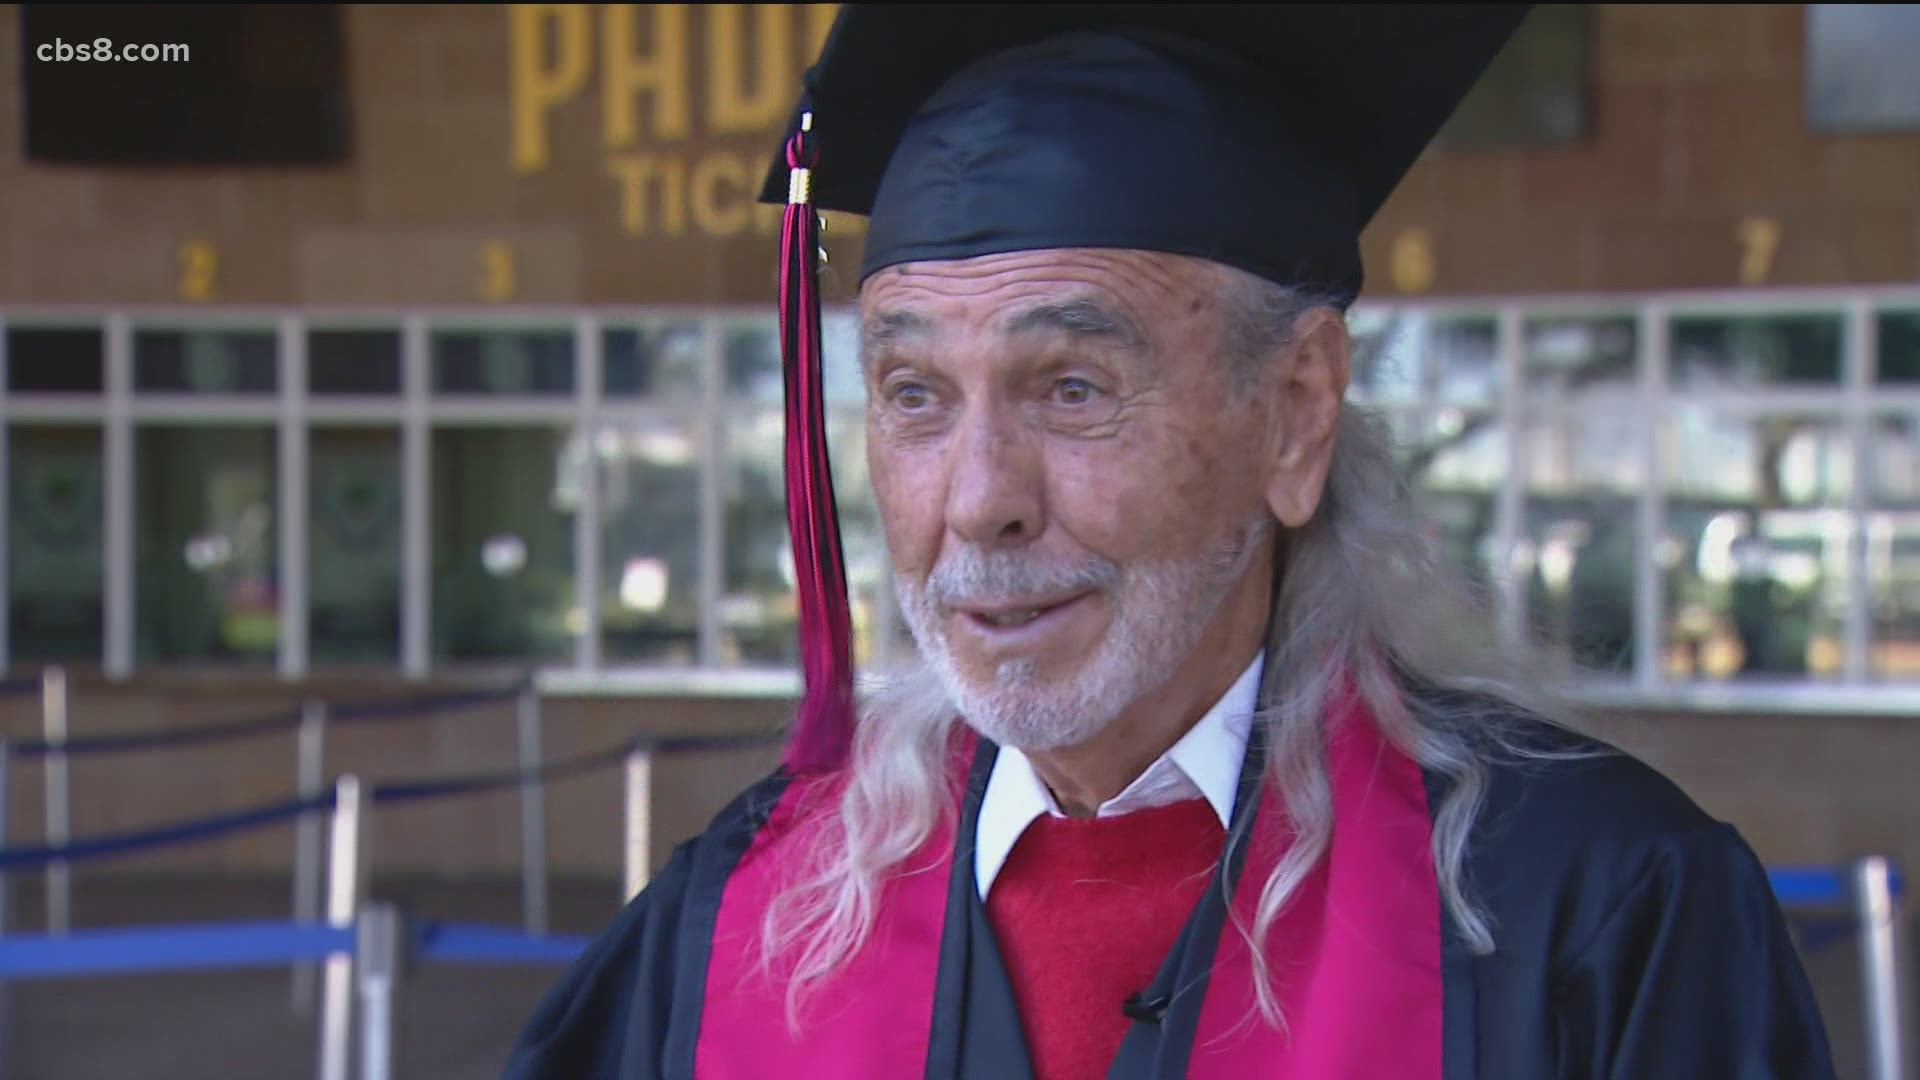 More than a half a century in the making, James Marino, 81, earns his bachelor's degree in film.